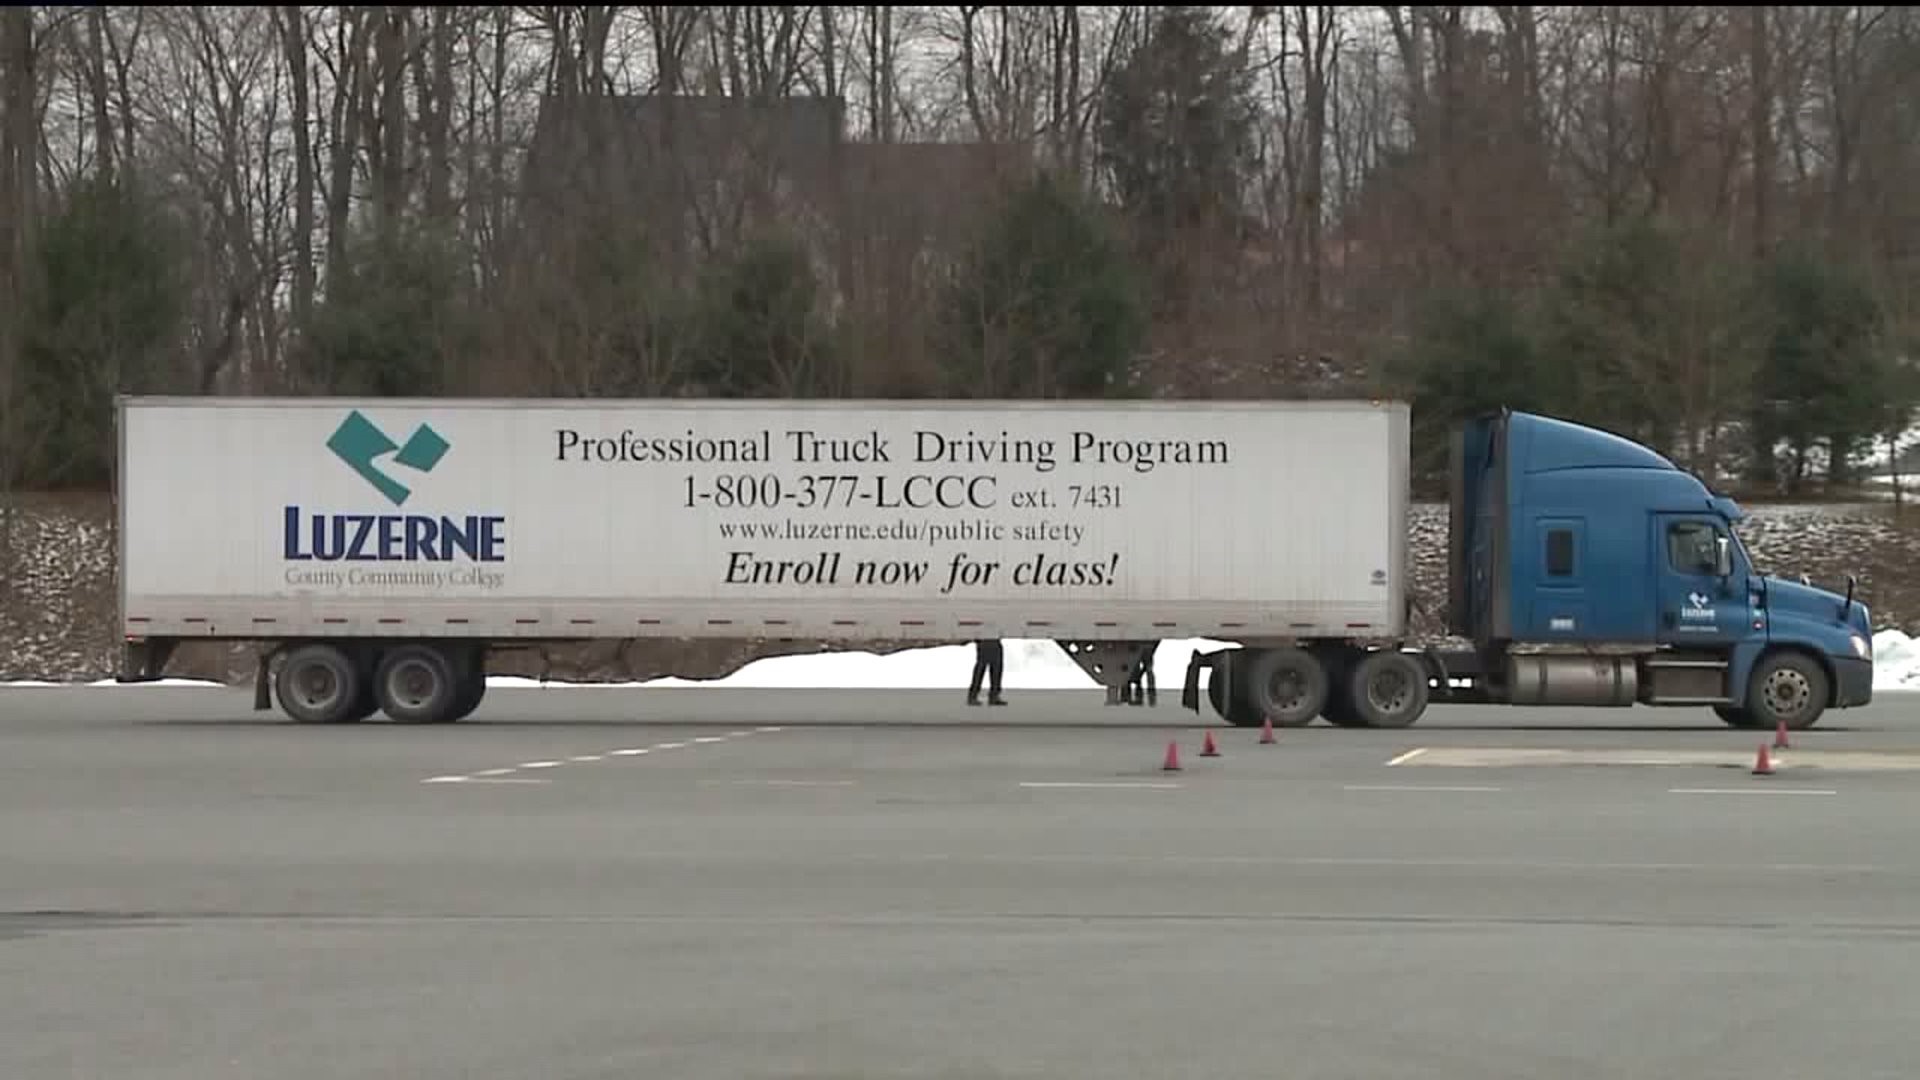 Truck Drivers Licensed at Community College May Need to Re-Take Test